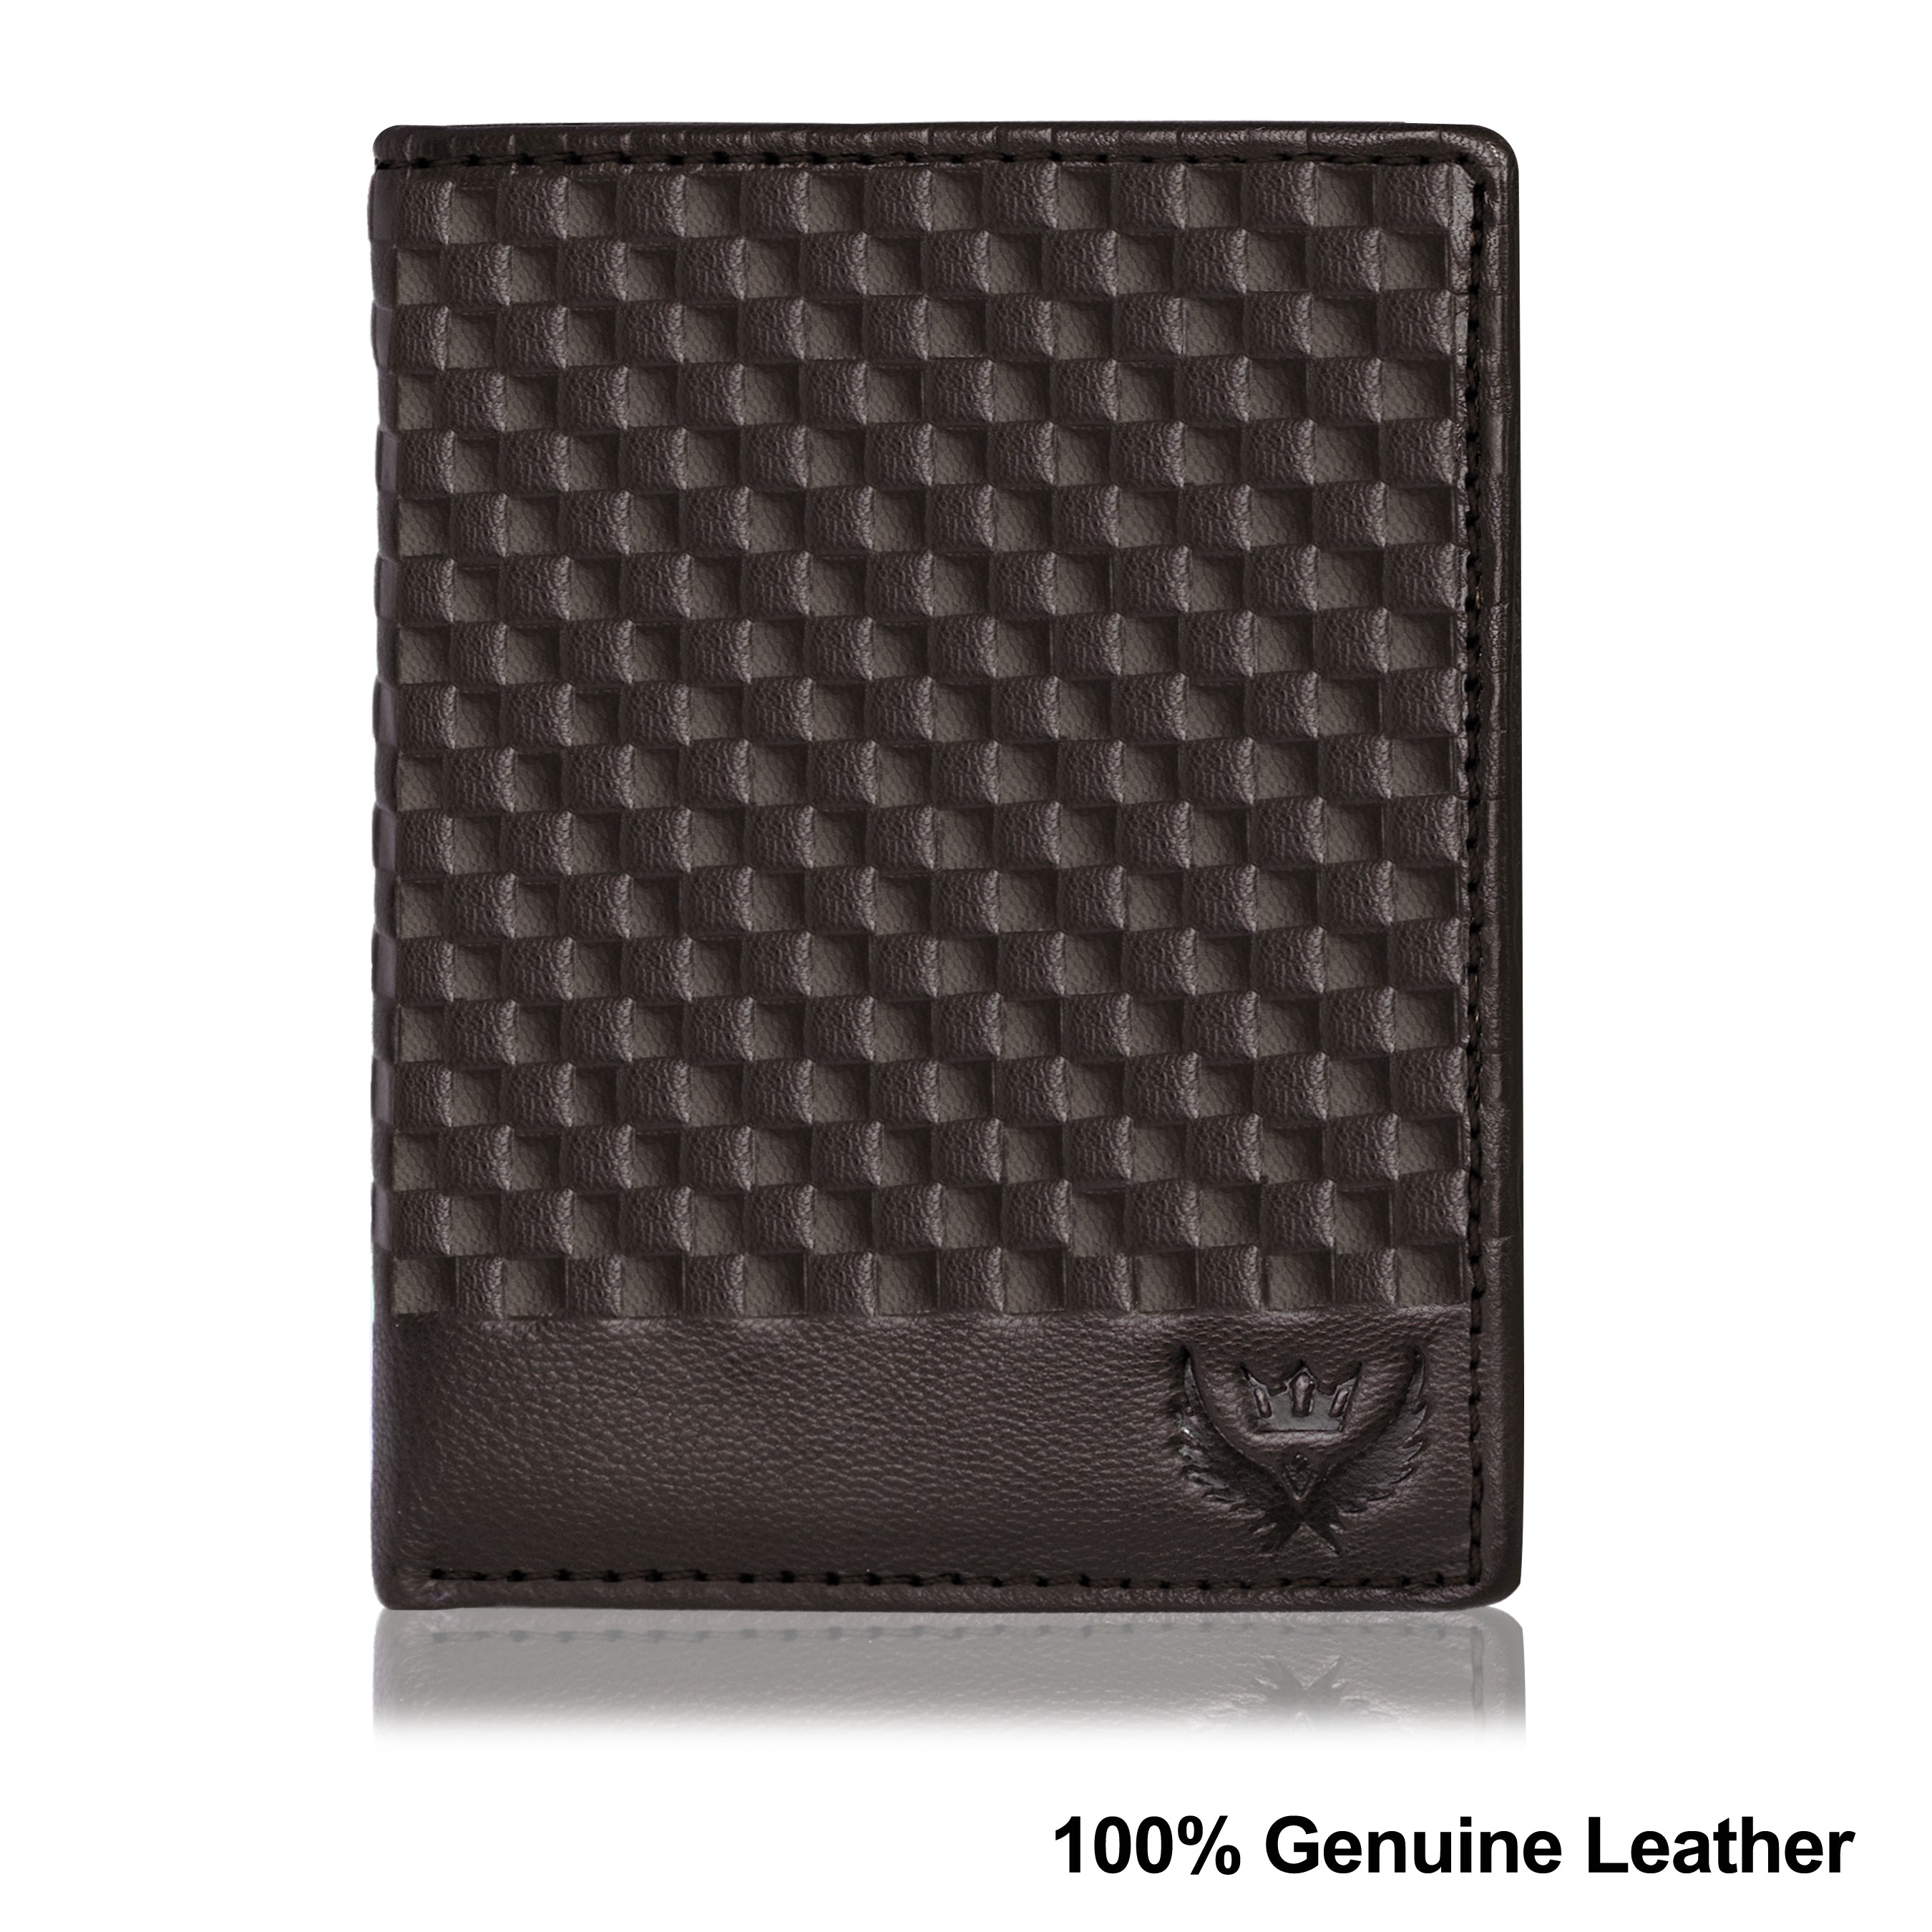 Large Capacity Unisex Wallet - Dark Brown Genuine Leather with RFID Blocking and Textured Finish